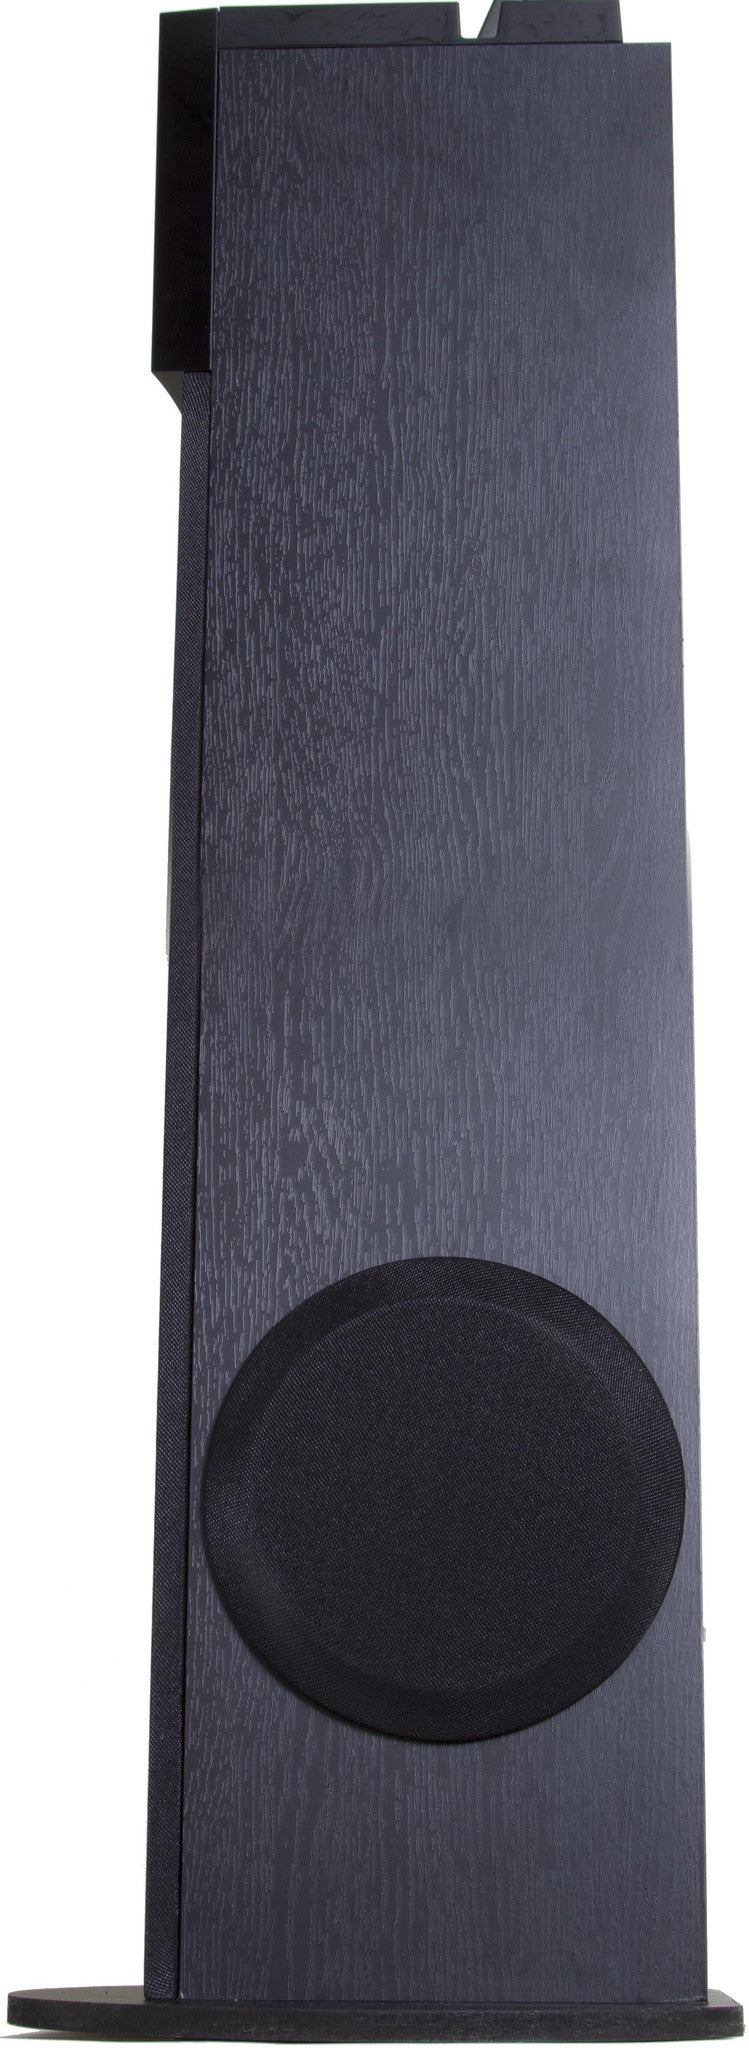 Tower Powerful Bluetooth Tower Speaker with FM, SD, TSME24 - SYKIK